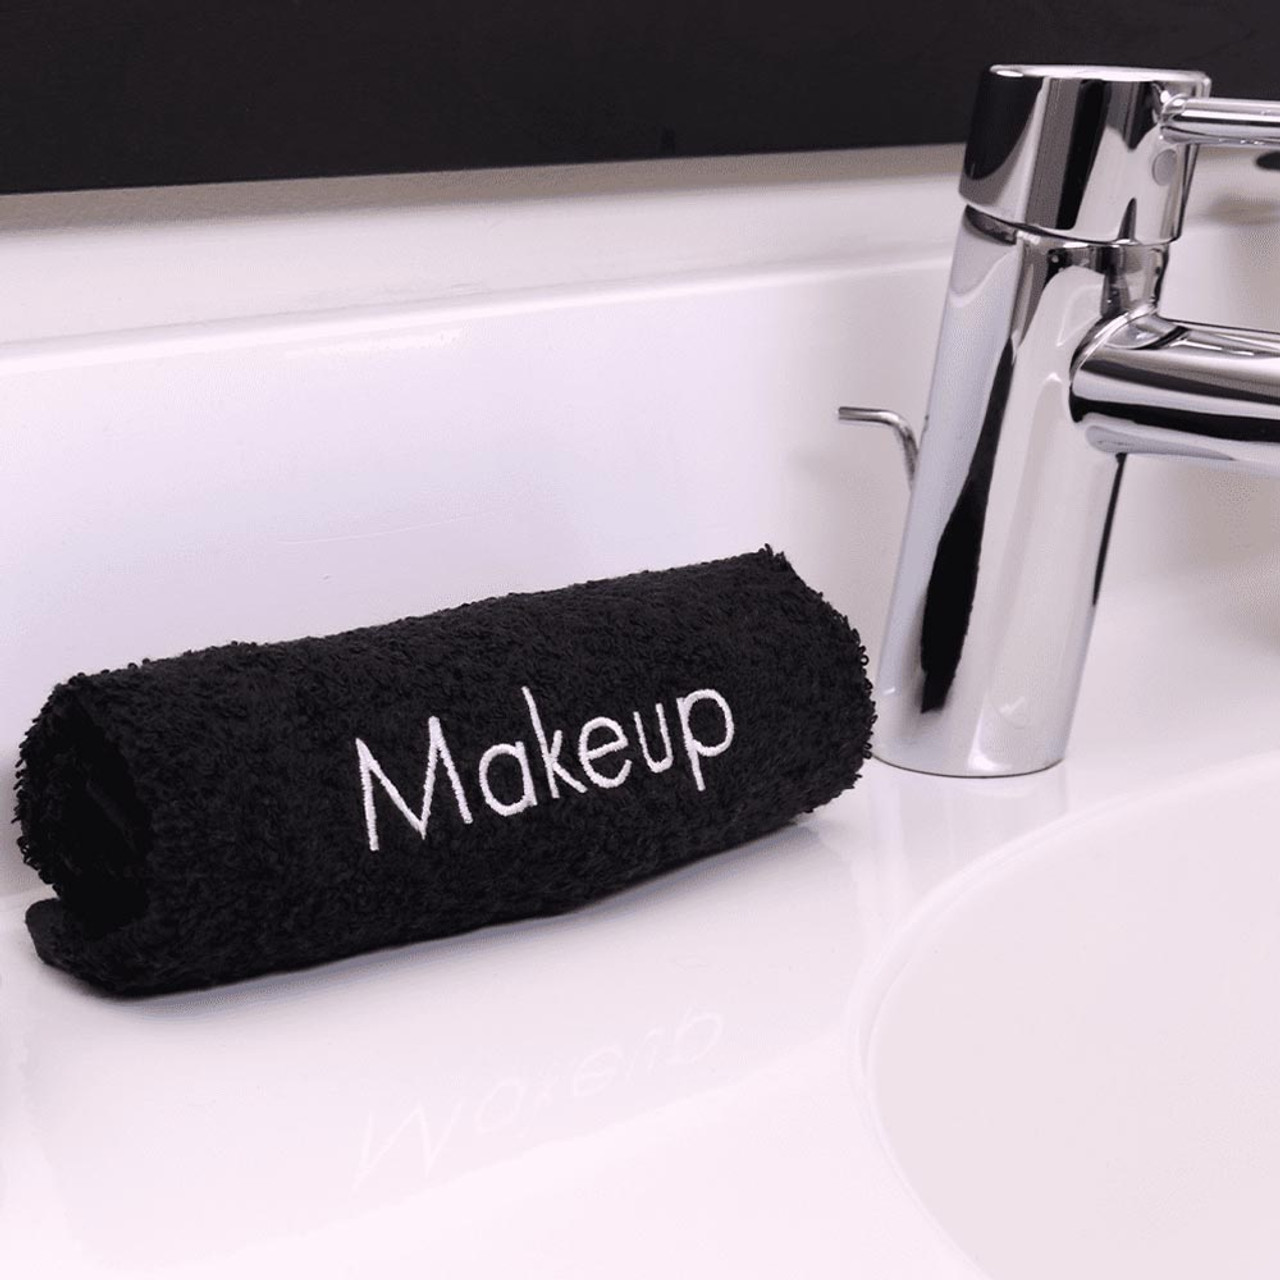 6 Pack of Makeup Removal Towels Embroidered Black 13 x 13 Cotton Washcloth